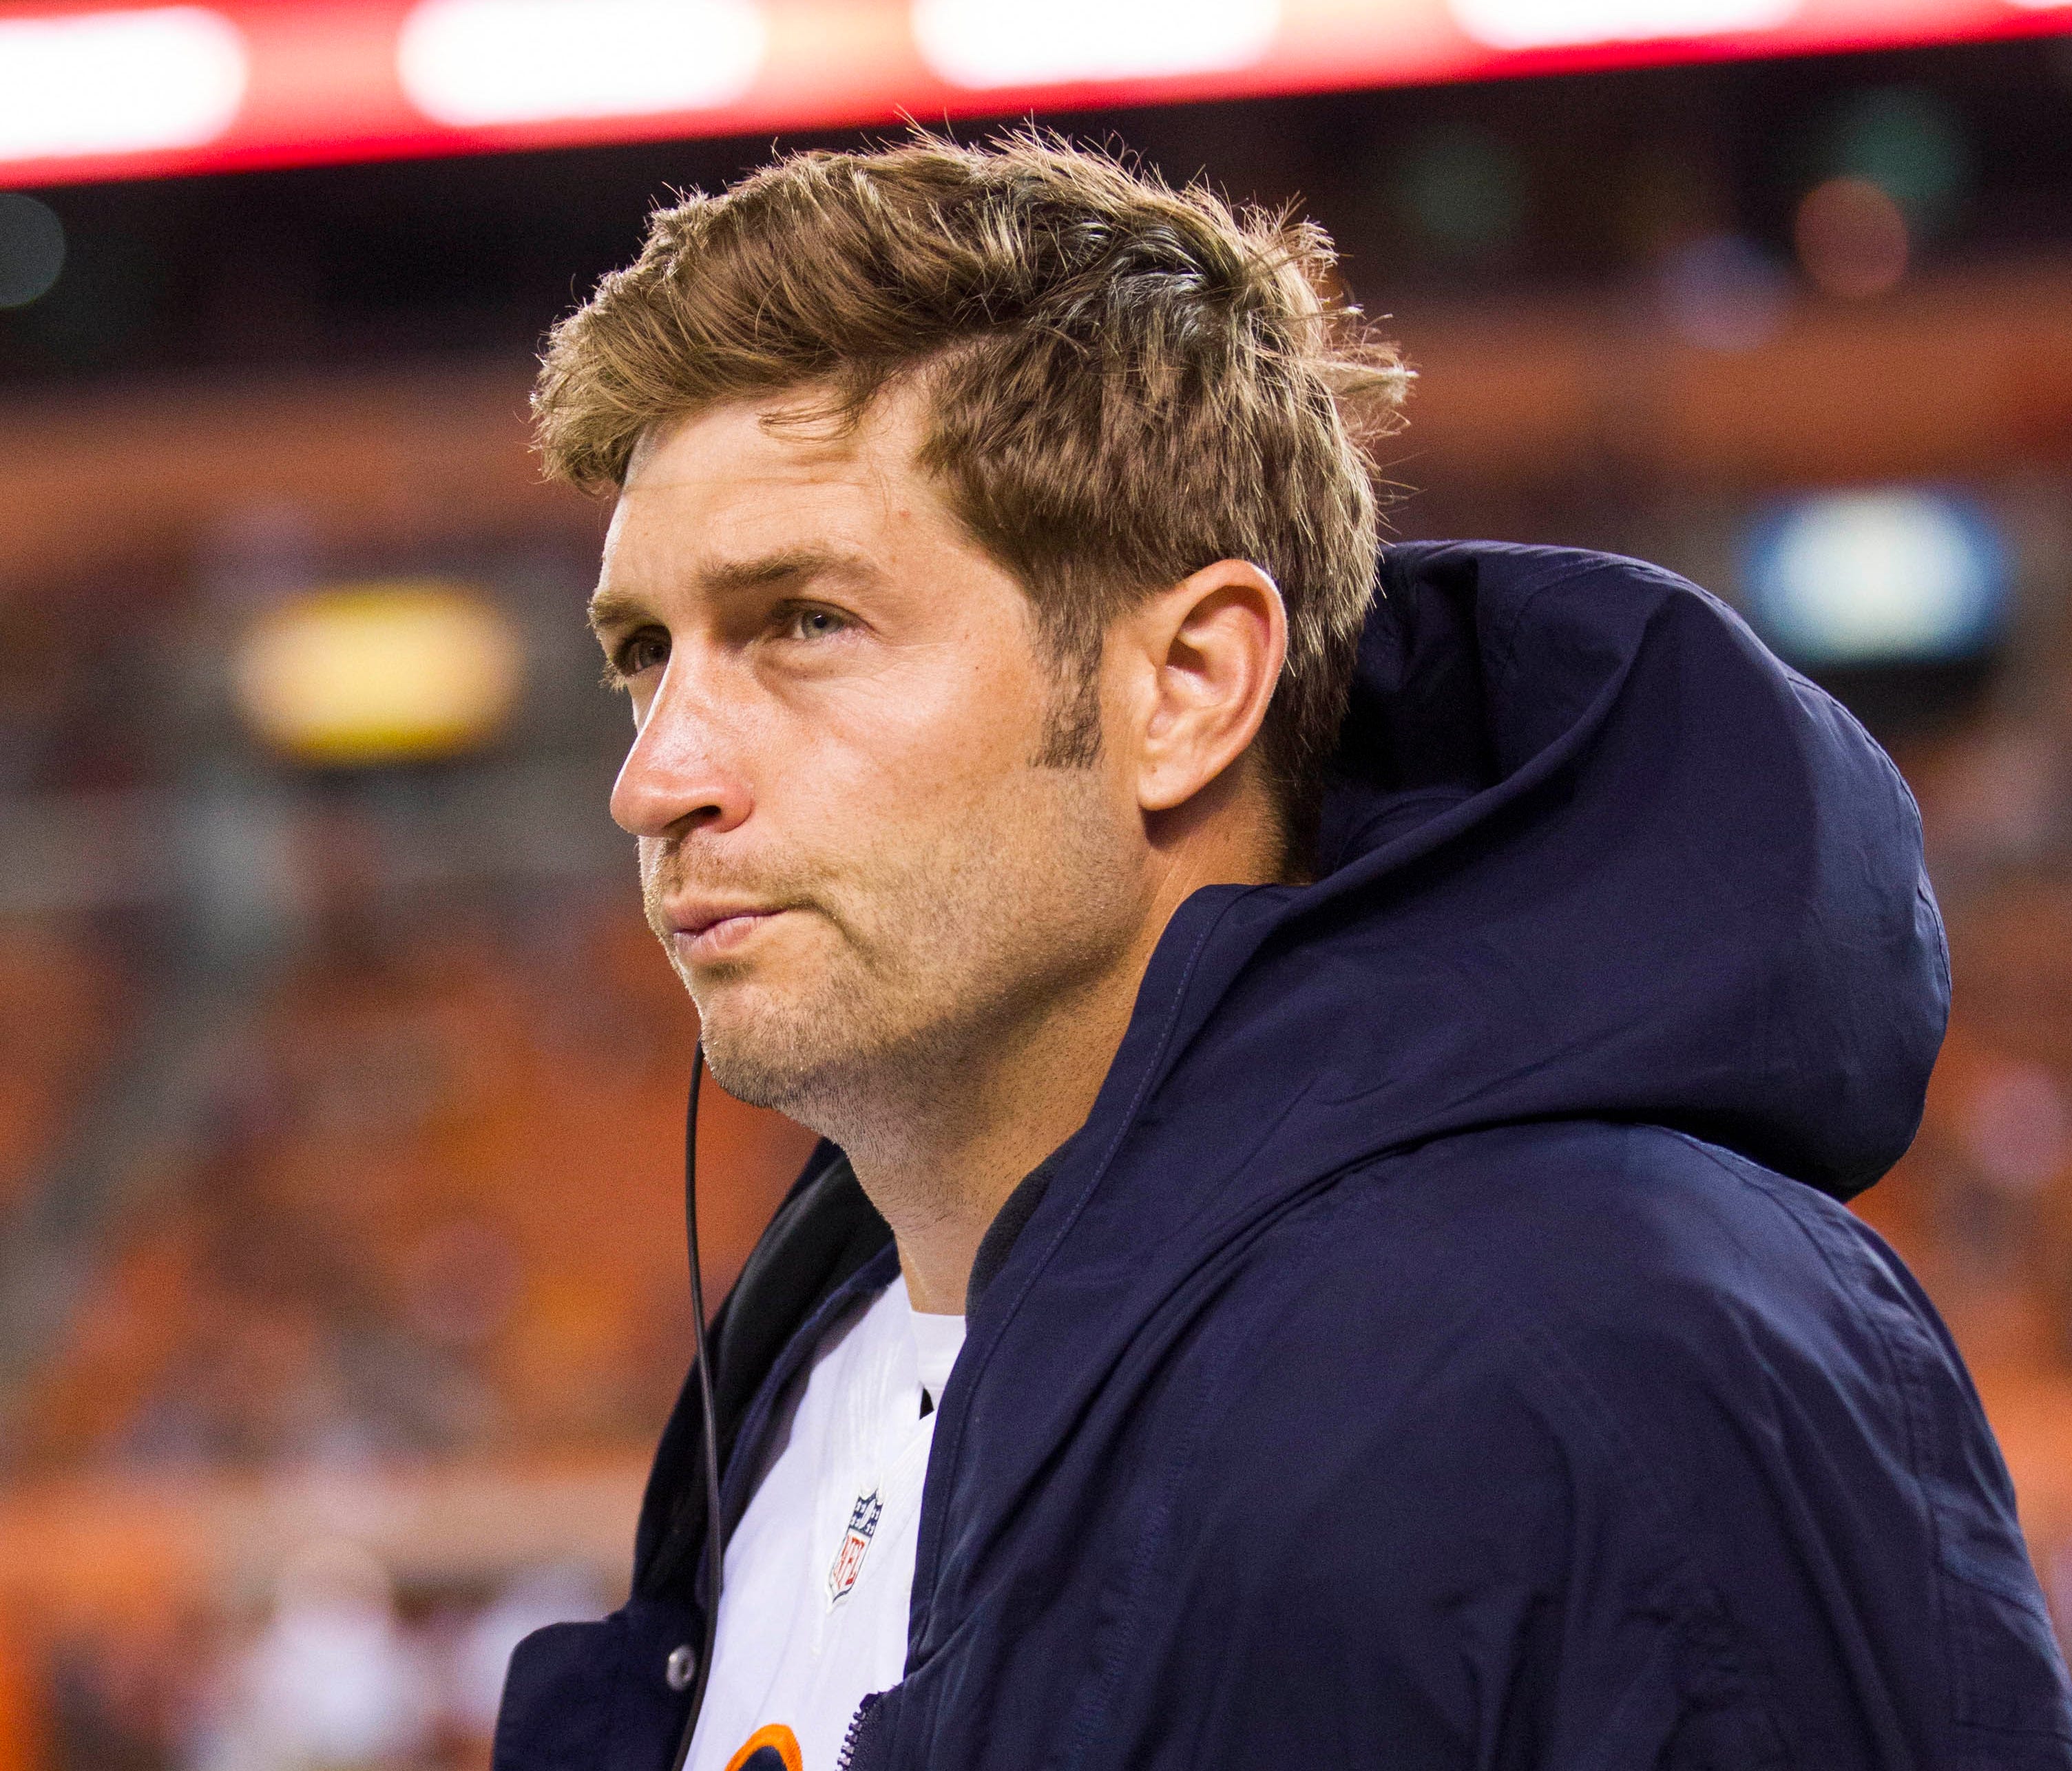 Chicago Bears quarterback Jay Cutler (6) walks the sidelines during the third quarter against the Cleveland Browns at FirstEnergy Stadium.